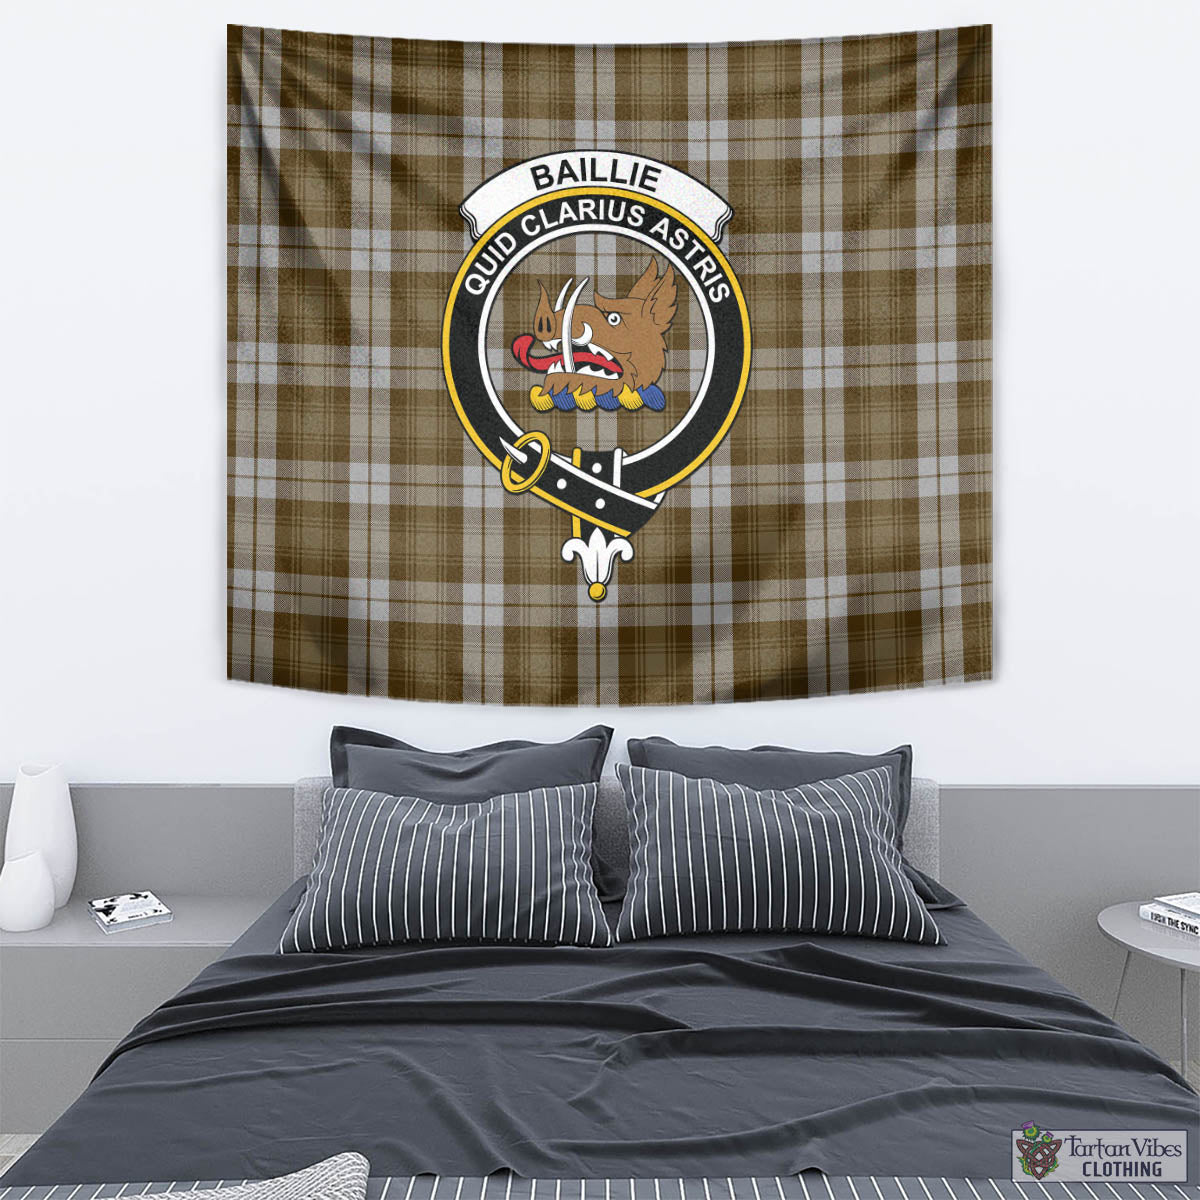 Tartan Vibes Clothing Baillie Dress Tartan Tapestry Wall Hanging and Home Decor for Room with Family Crest